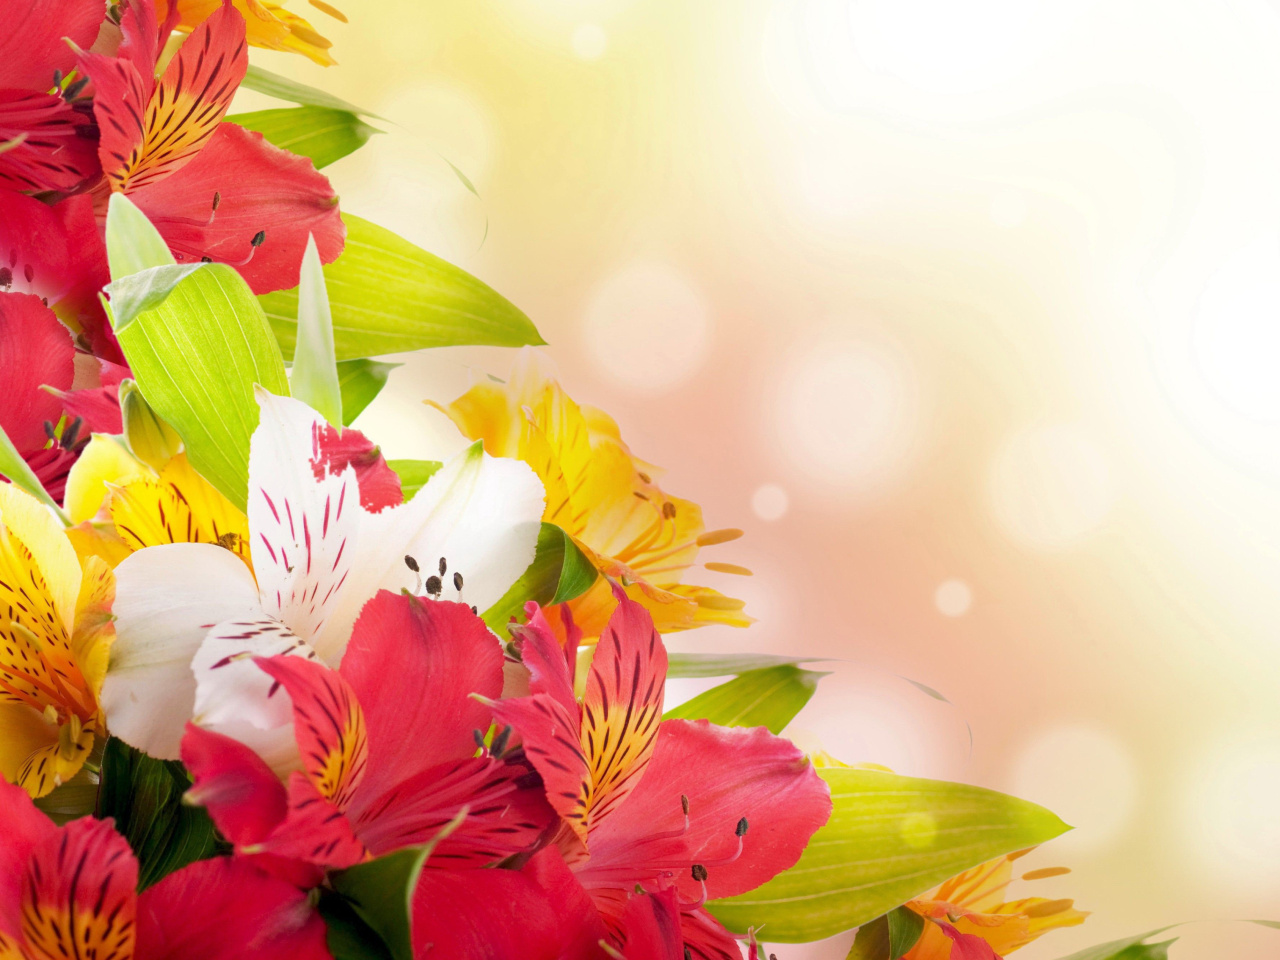 Flowers for the holiday of March 8 wallpaper 1280x960